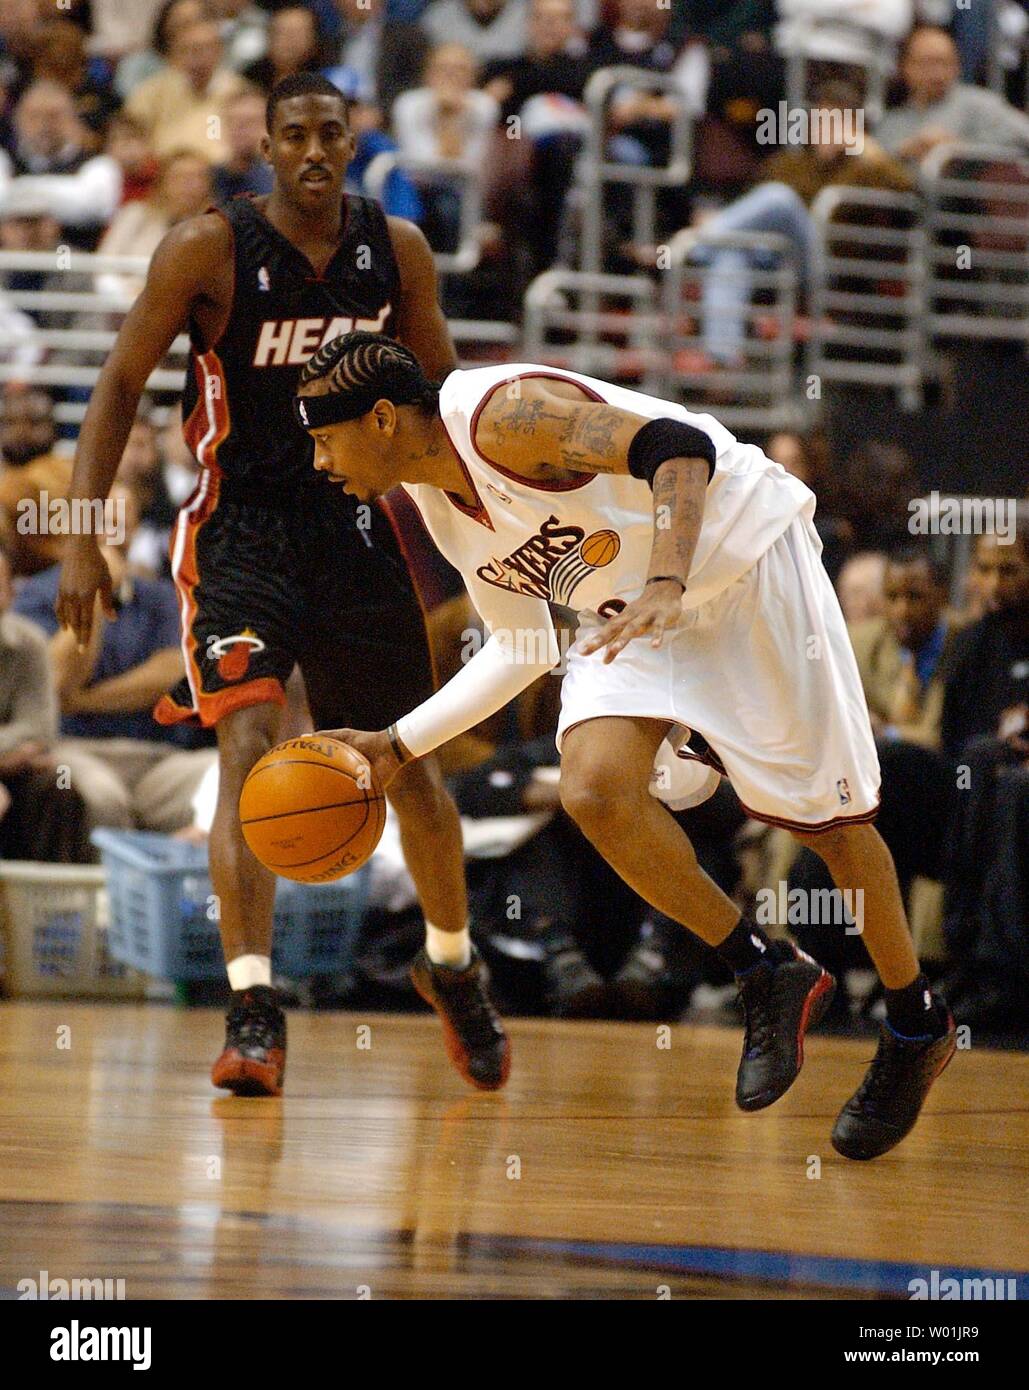 The Heats' Eddie Jones (6) watches as the 76ers' Allen Iverson (3) runs away with the ball as Philadelphia hosts Miami in the season opening game at the Wachovia Center in Philadelphia, on October 28, 2003. (JON ADAMS/UPI) Stock Photo